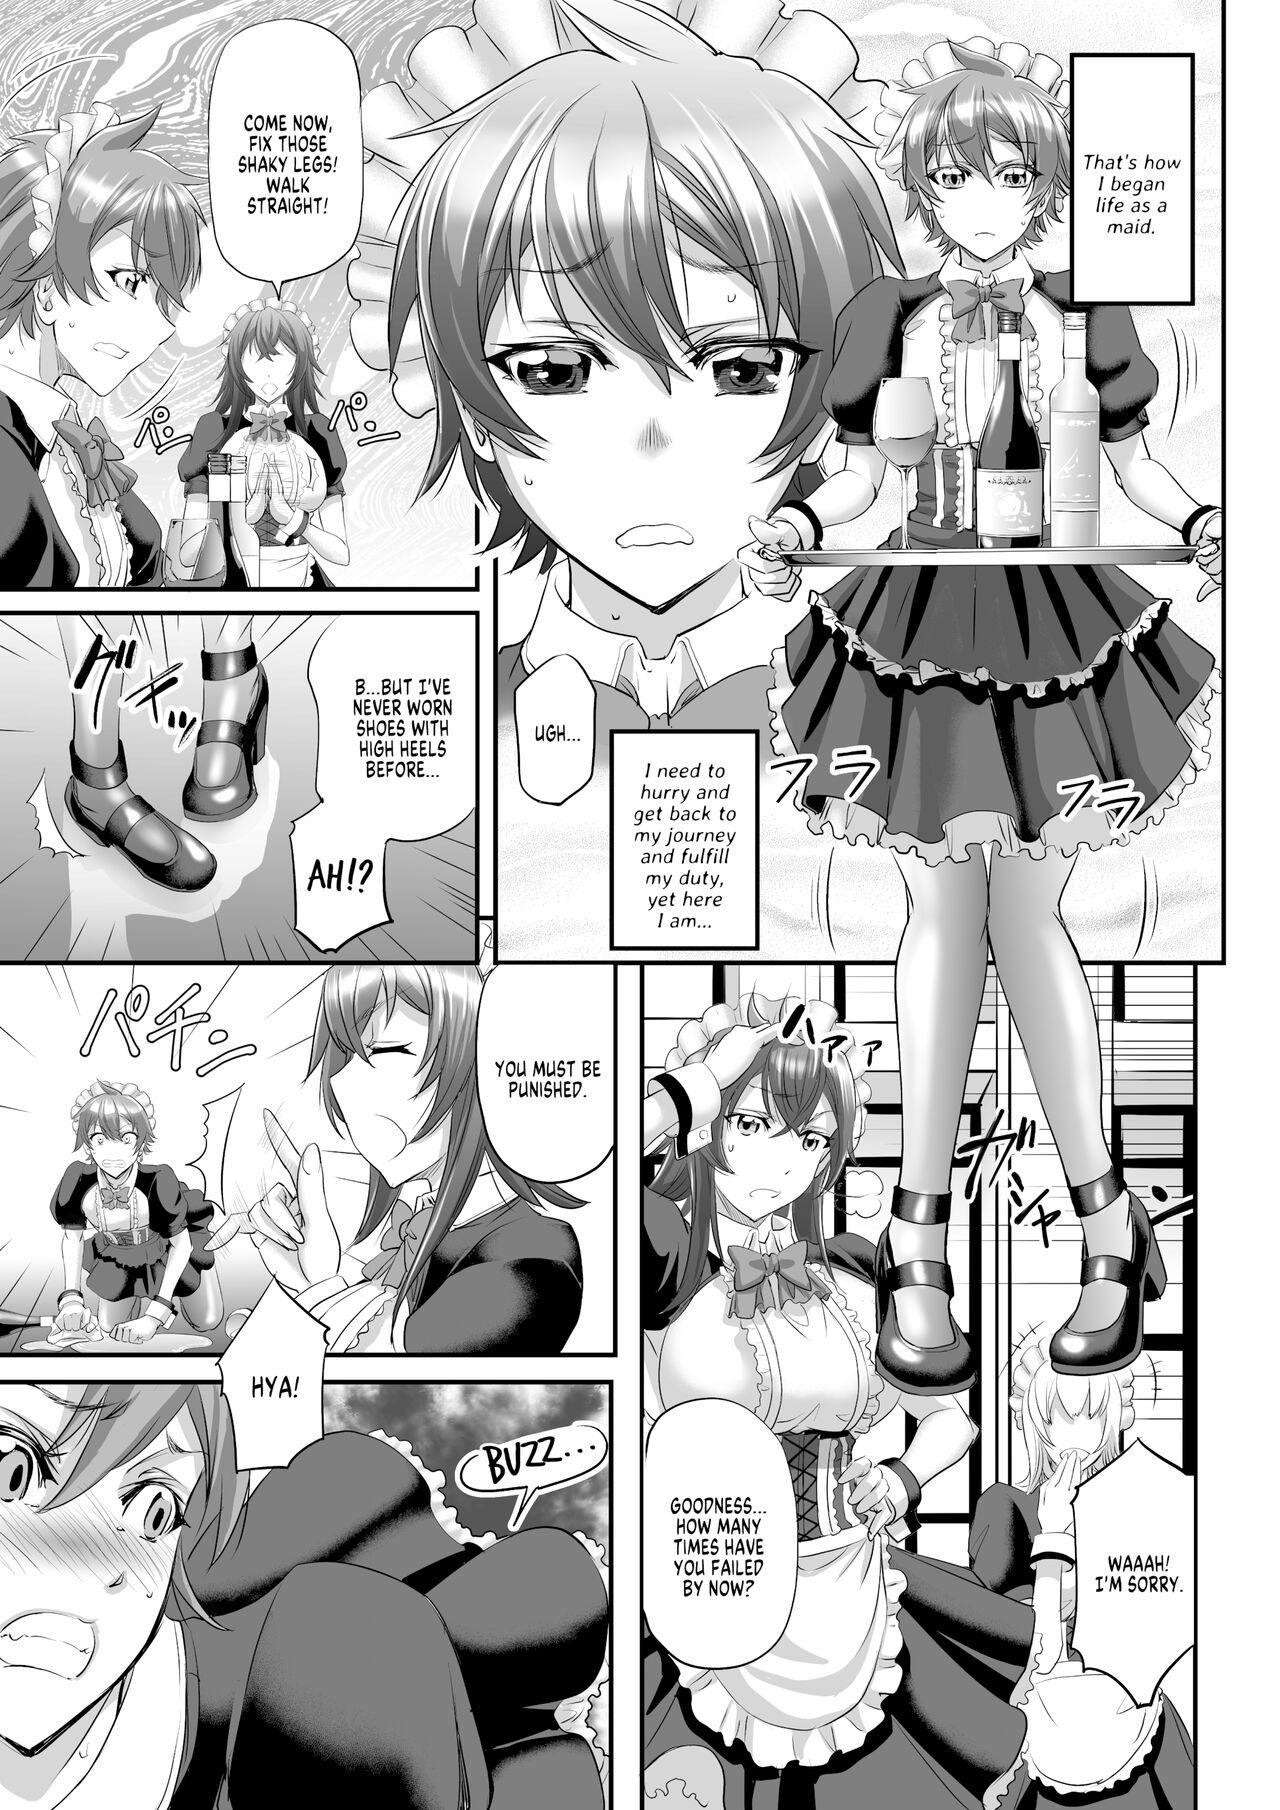 Gay Big Cock MonMusu Quest! ~ Luka no Maid Shugyou | Monster Girl Quest! Luka’s Maid Training - Monster girl quest Shy - Page 7